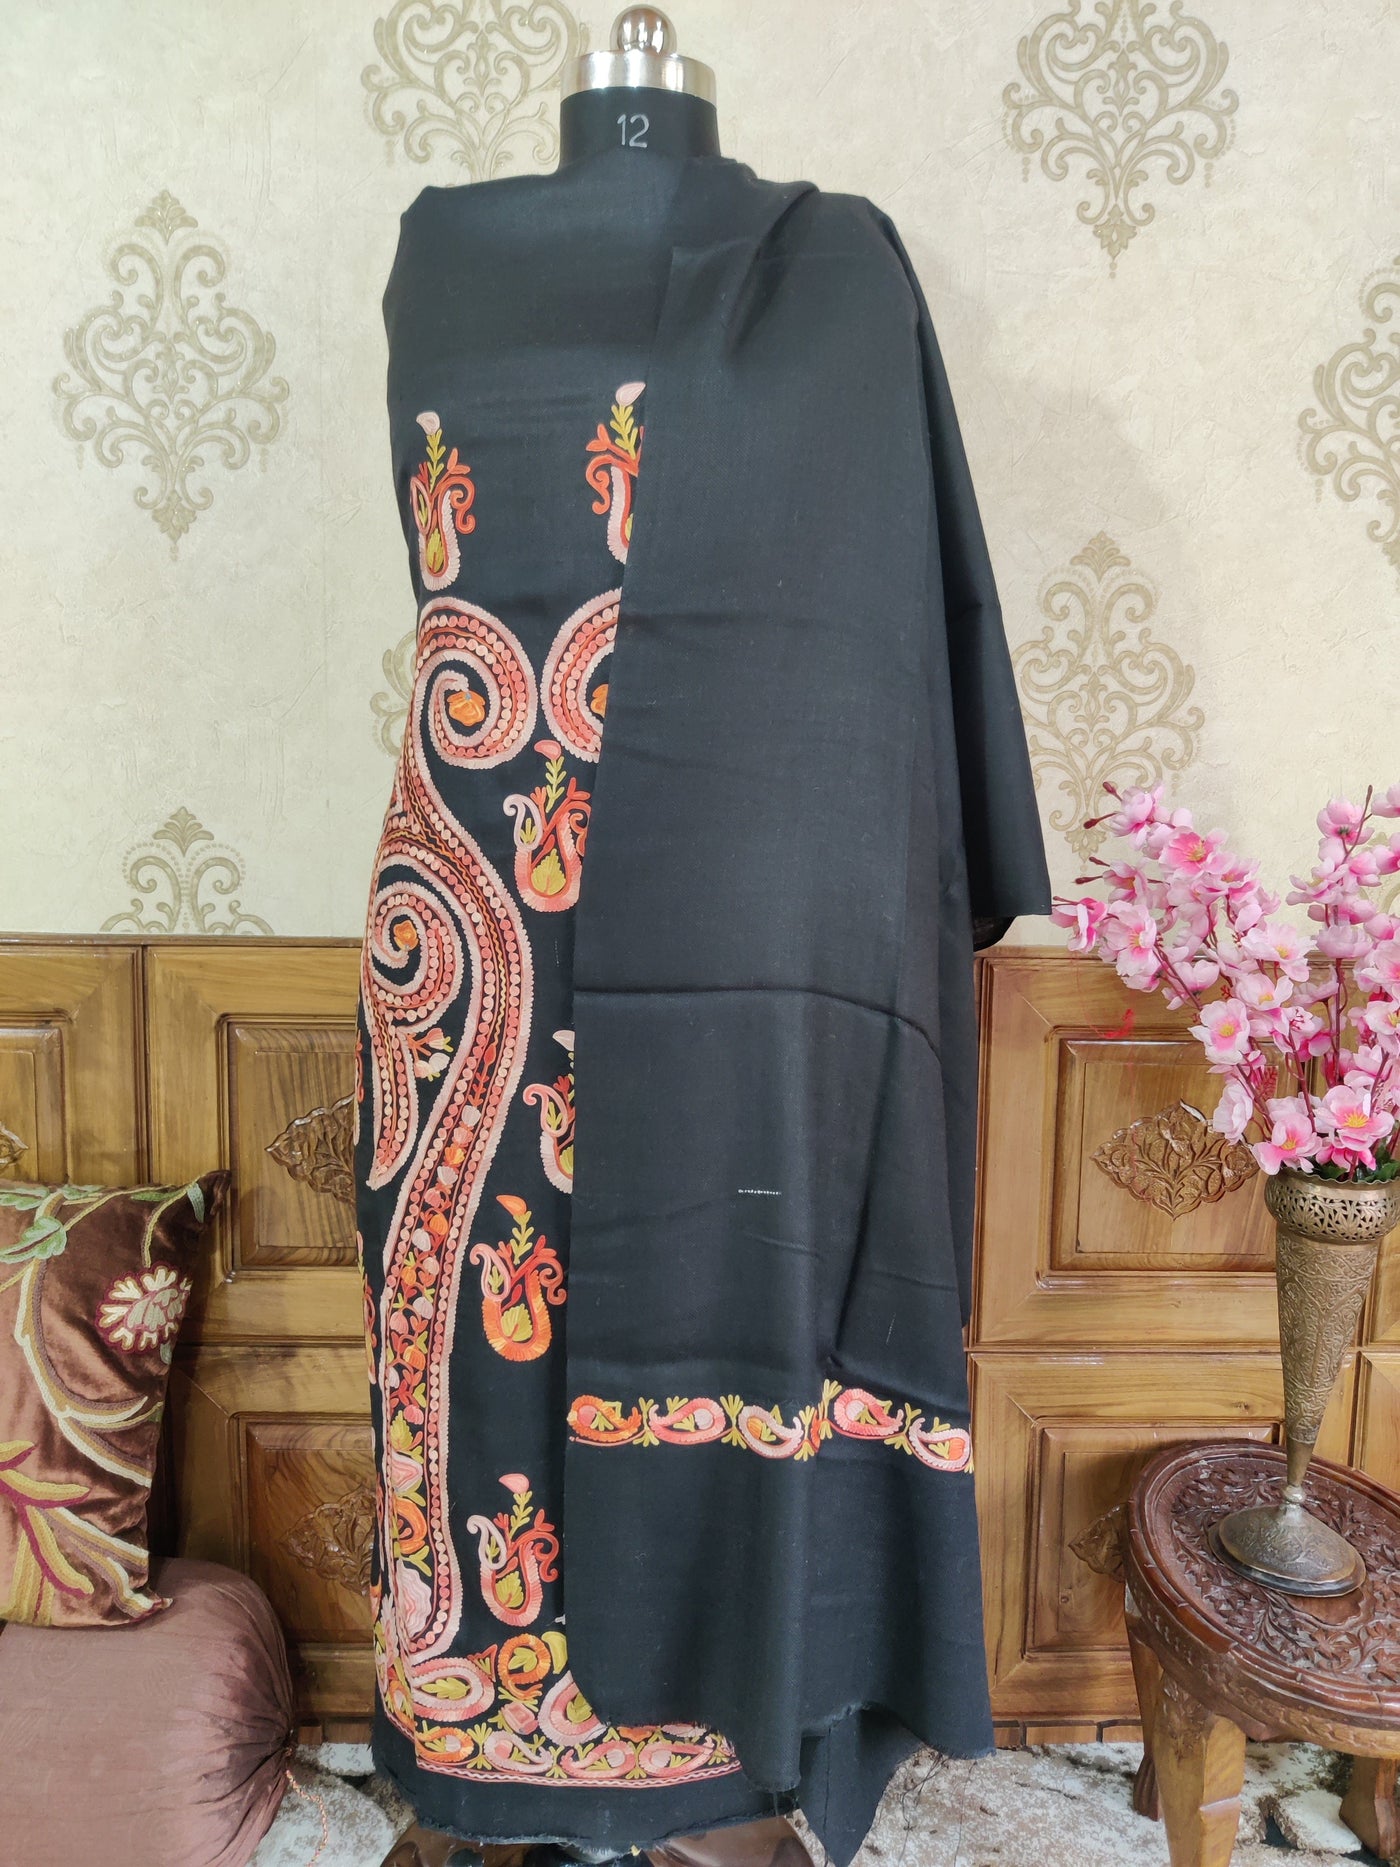 Black Kashmiri Woolen Suit With All over Ari Embroidery in Multi Color Paisley Design (3 Pcs) Woolen Suit KashmKari Blue Kashmiri Woollen Suit With Tilla Embroidery jaal design (3 pcs).  Kashmiri Suit online